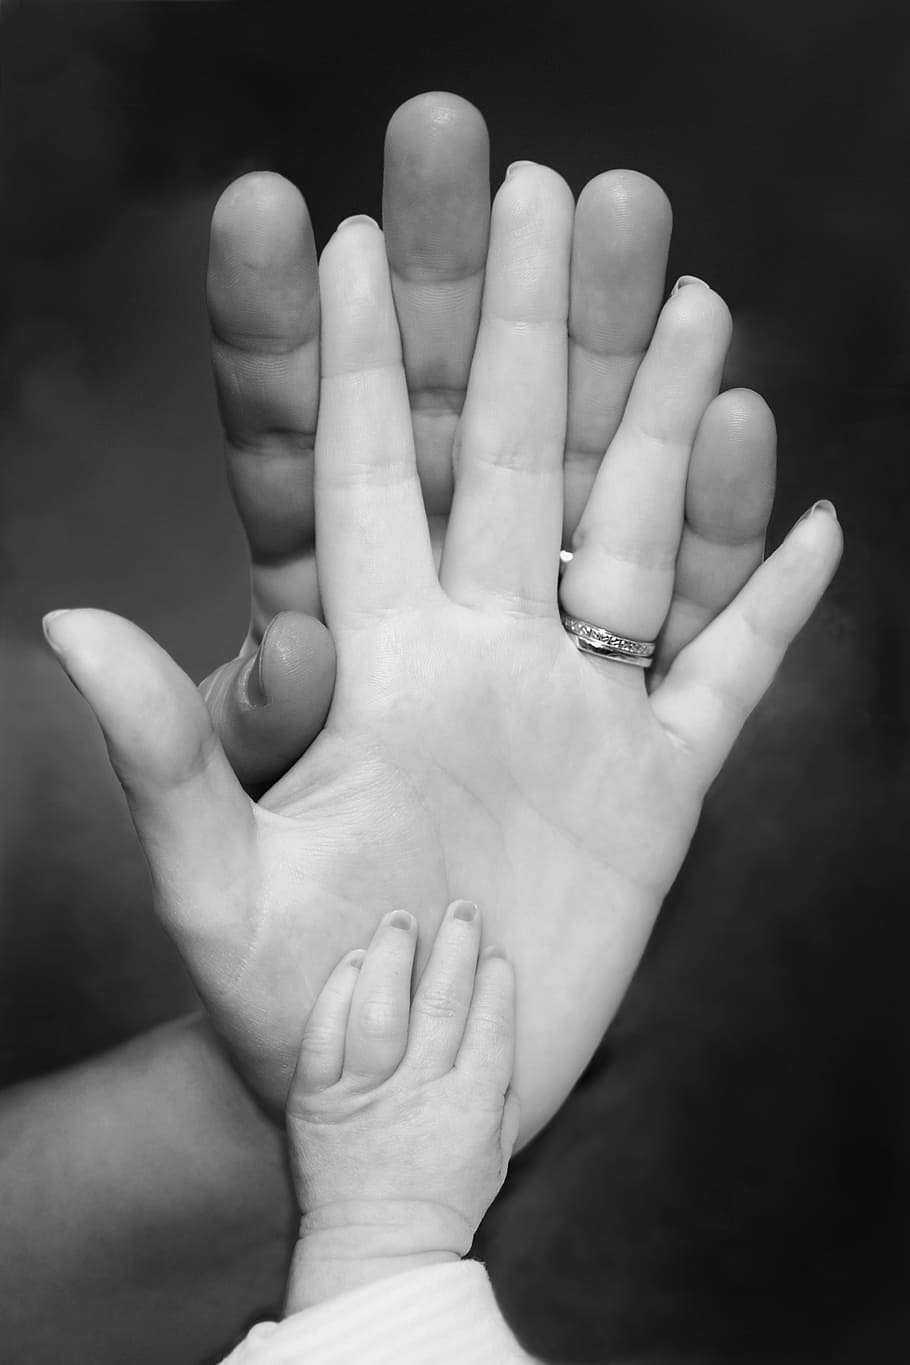 HD wallpaper: family hands photo, love, speaker, baby, mother, union,  parents | Wallpaper Flare